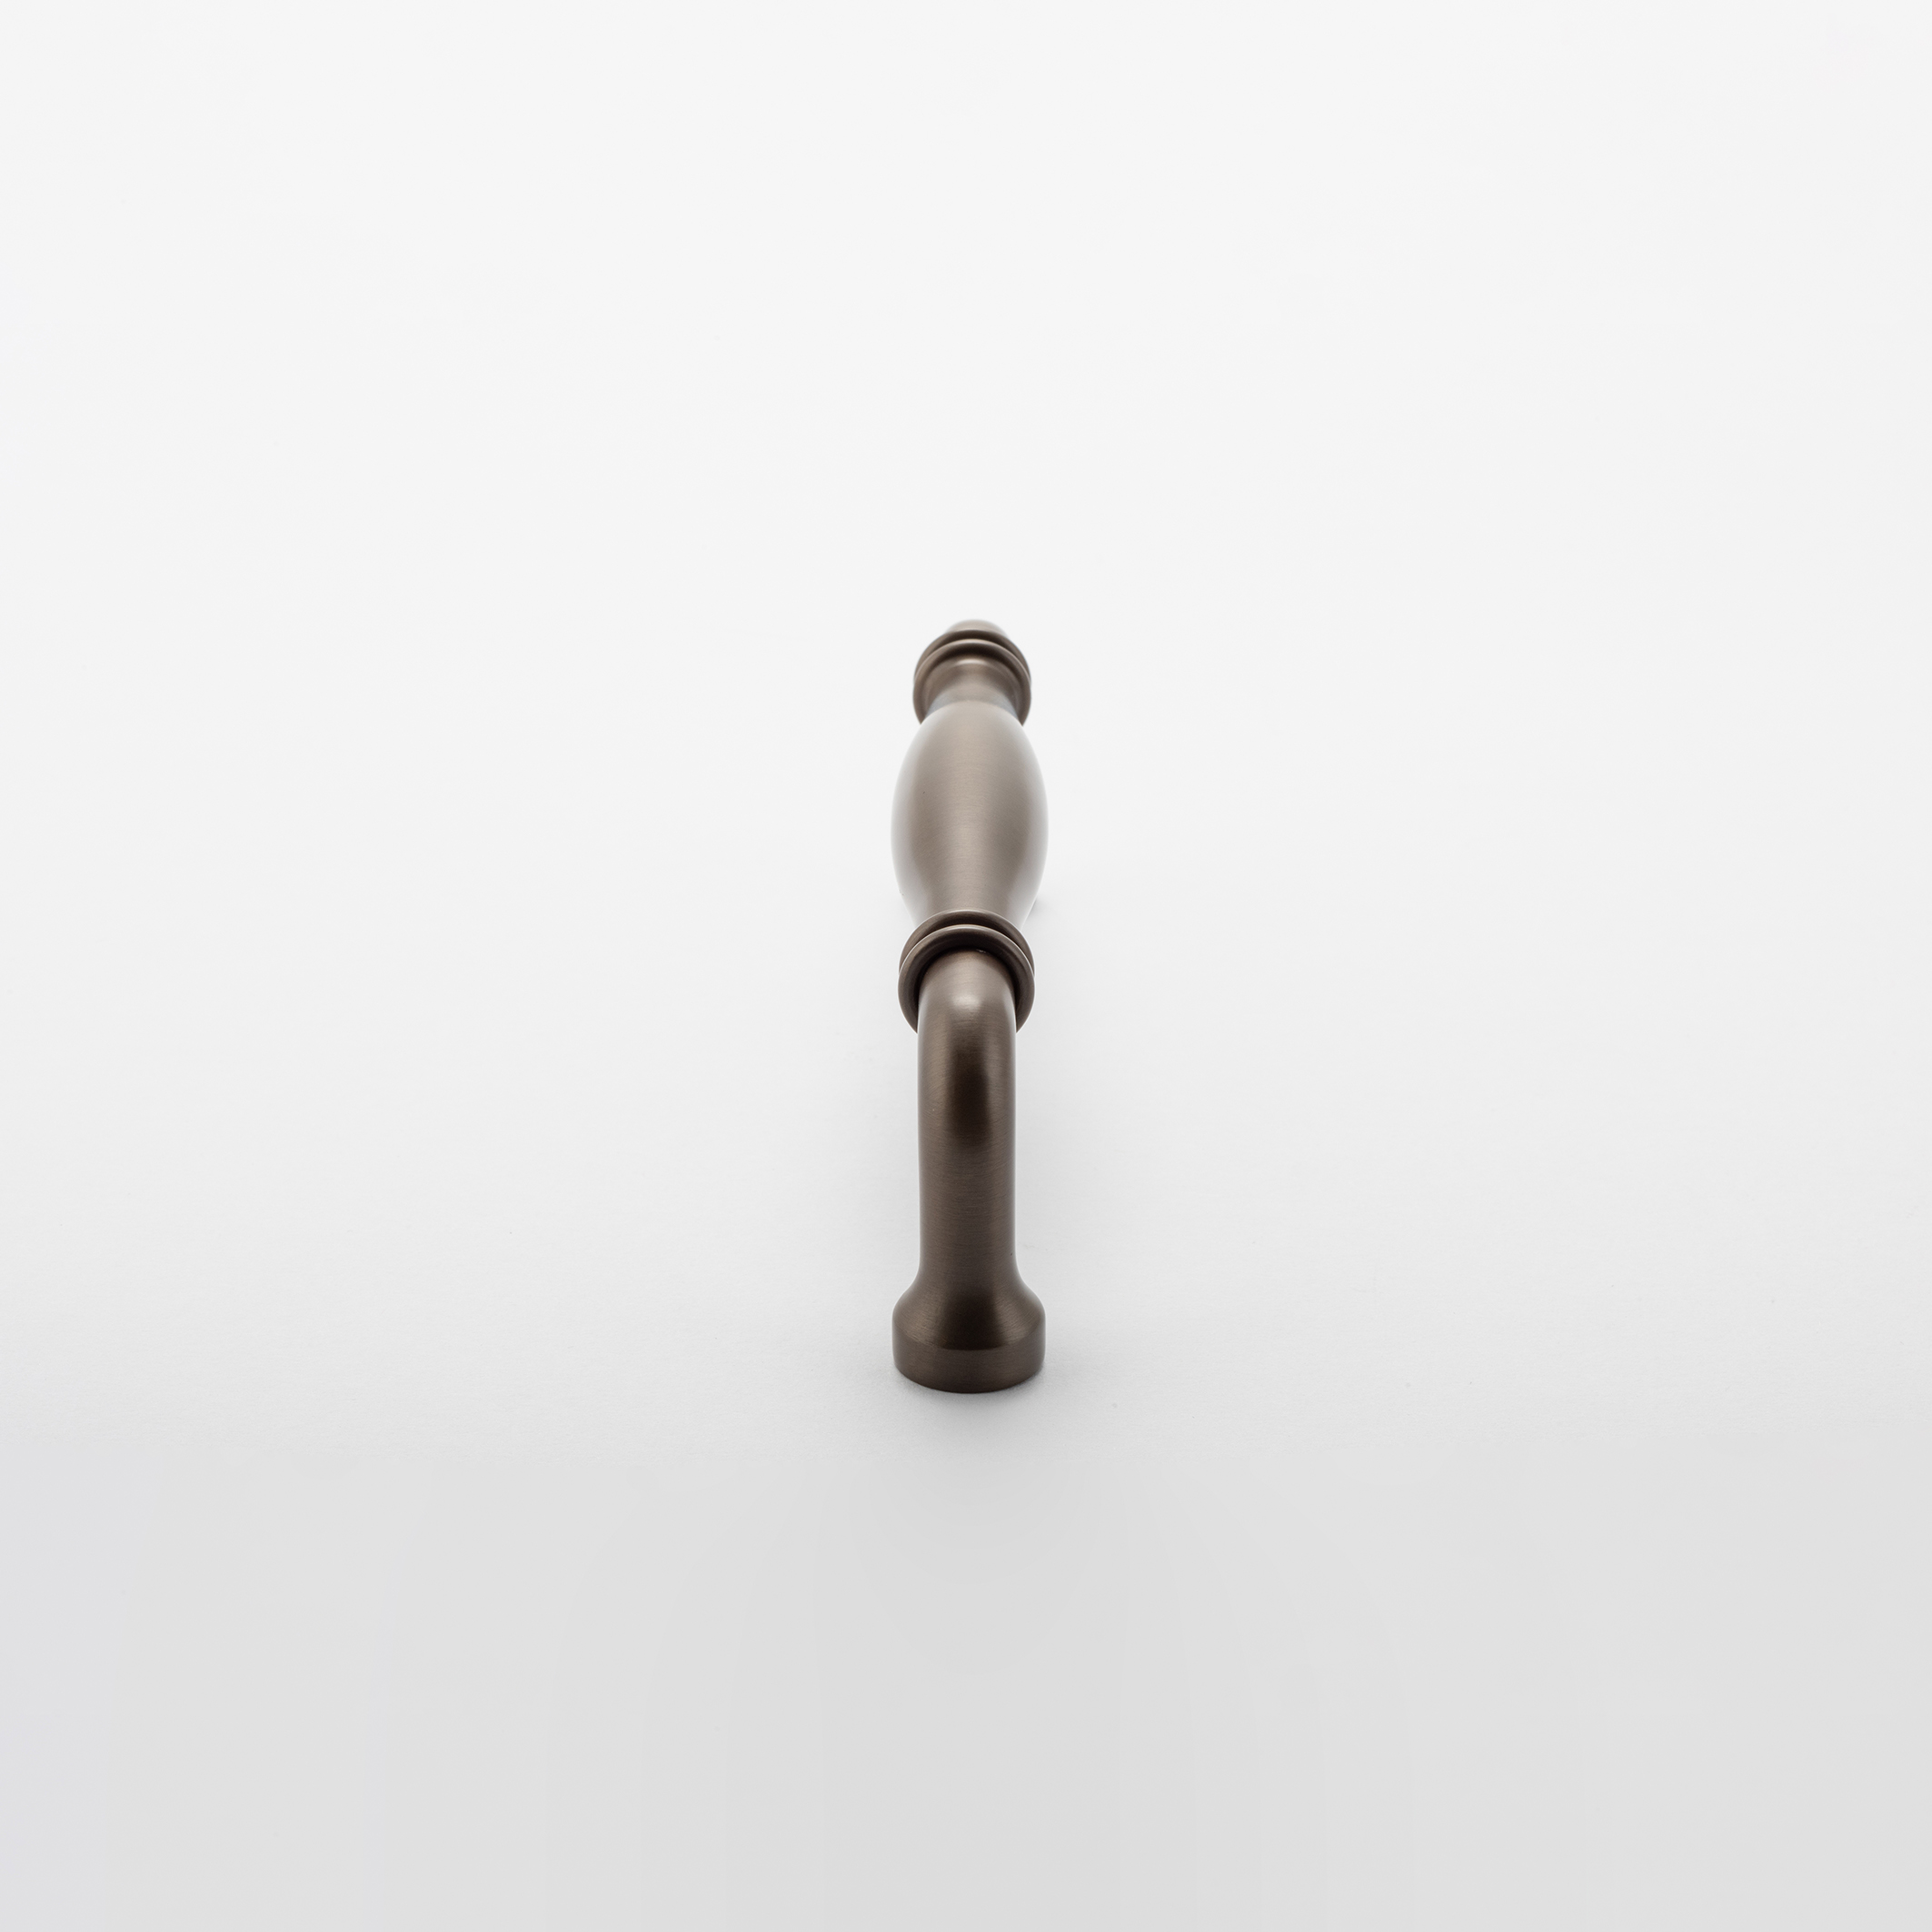 21091B - Sarlat Cabinet Pull with Backplate - CTC320mm - Signature Brass